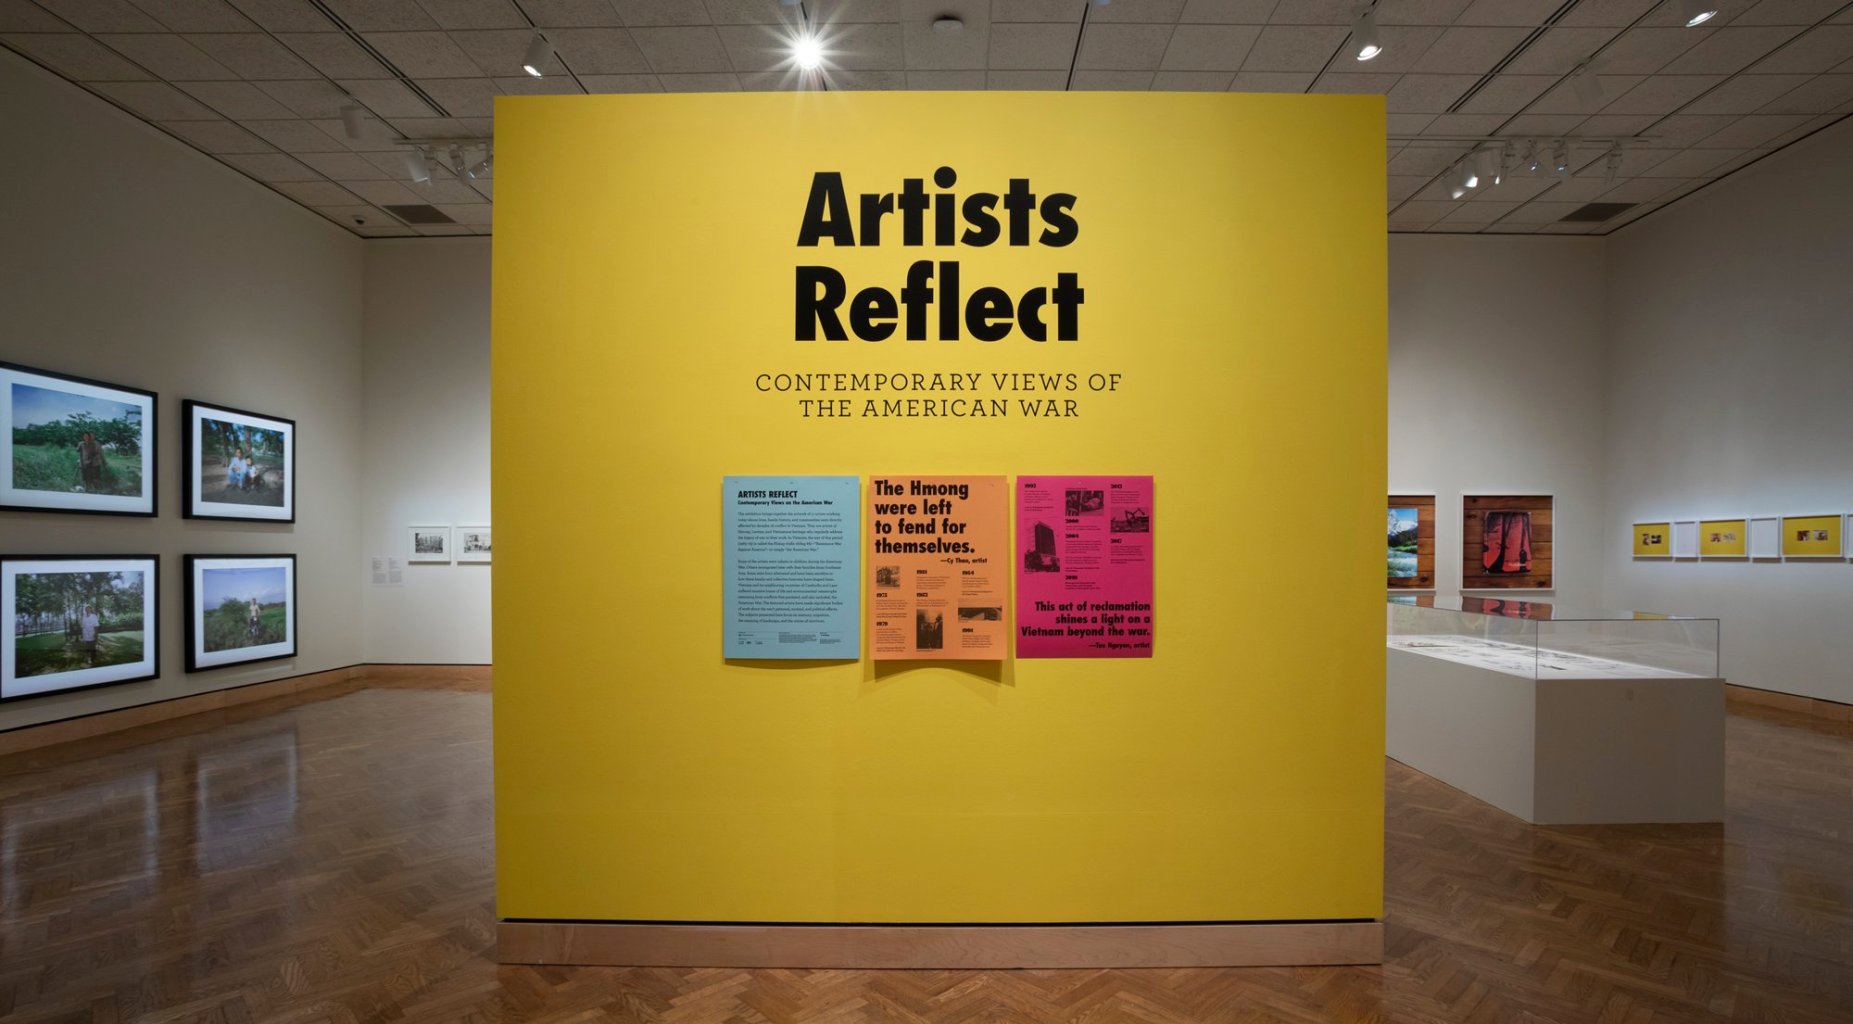 A title wall for the "Artists Reflect: Contemporary Views of the American War" exhibition, with a timeline and quotes reading "The Hmong were left to fend for themselves" and "This act of reclamation shines a light on a Vietnam beyond the war."